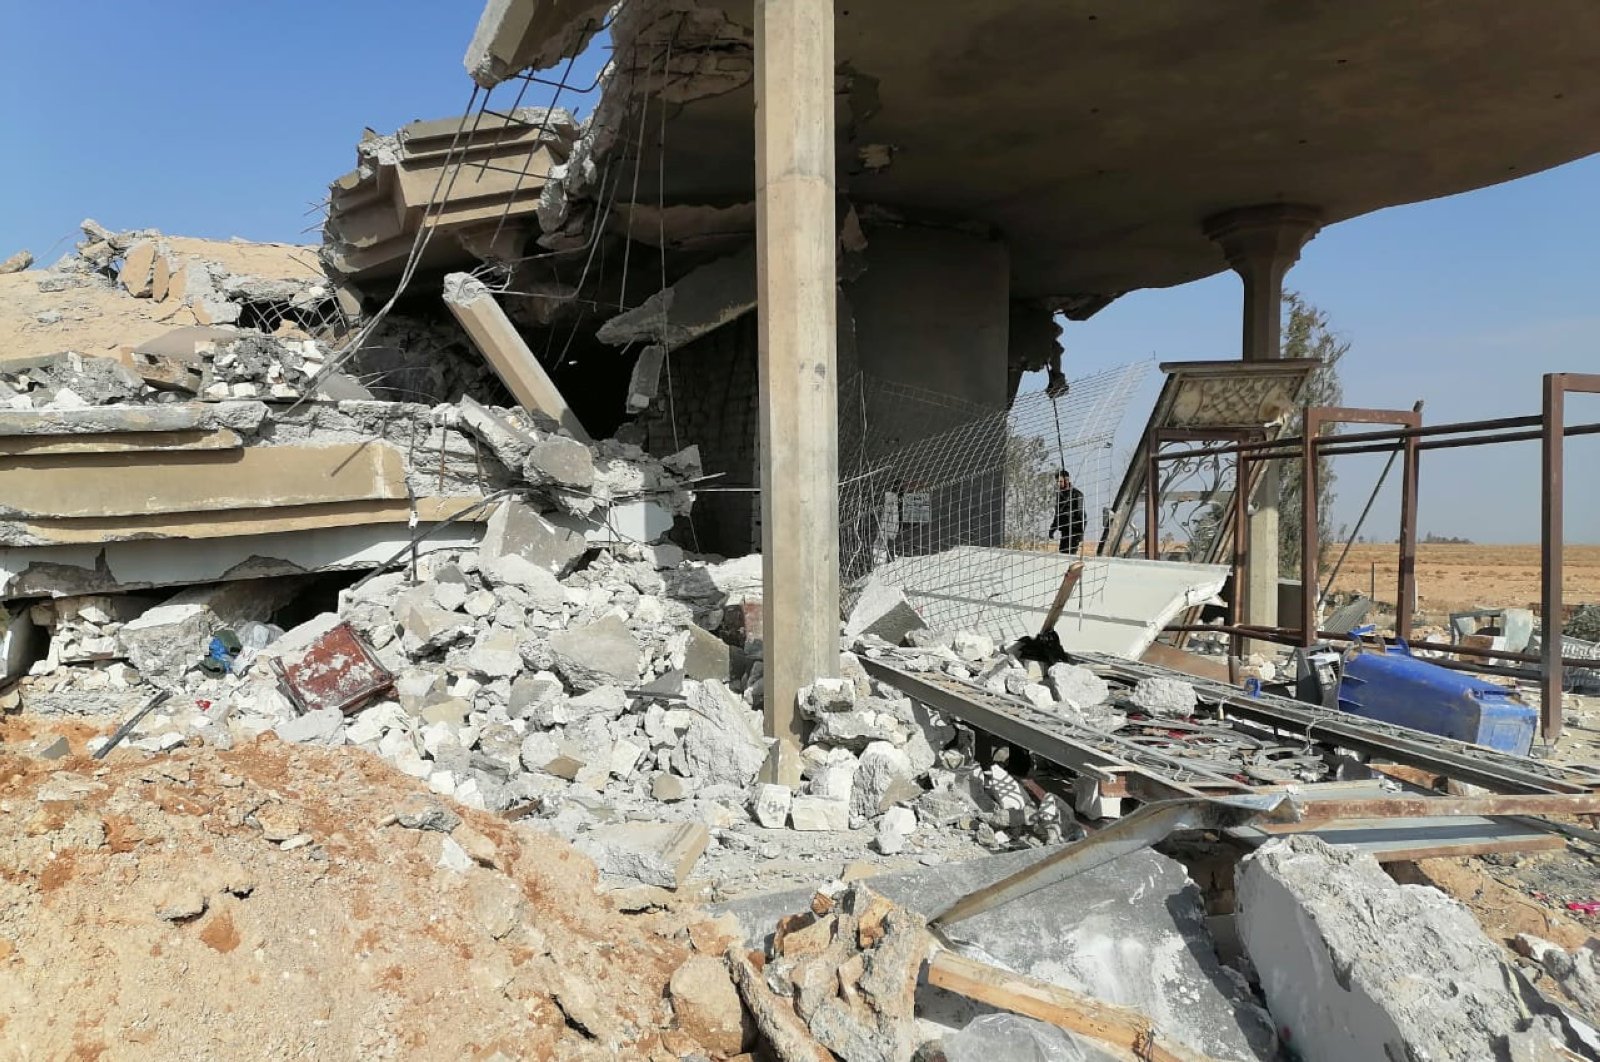 Destroyed headquarters of Kataib Hezbollah militia group are seen after in an air strike in Qaim, Iraq, December 30, 2019. (Reuters Photo)